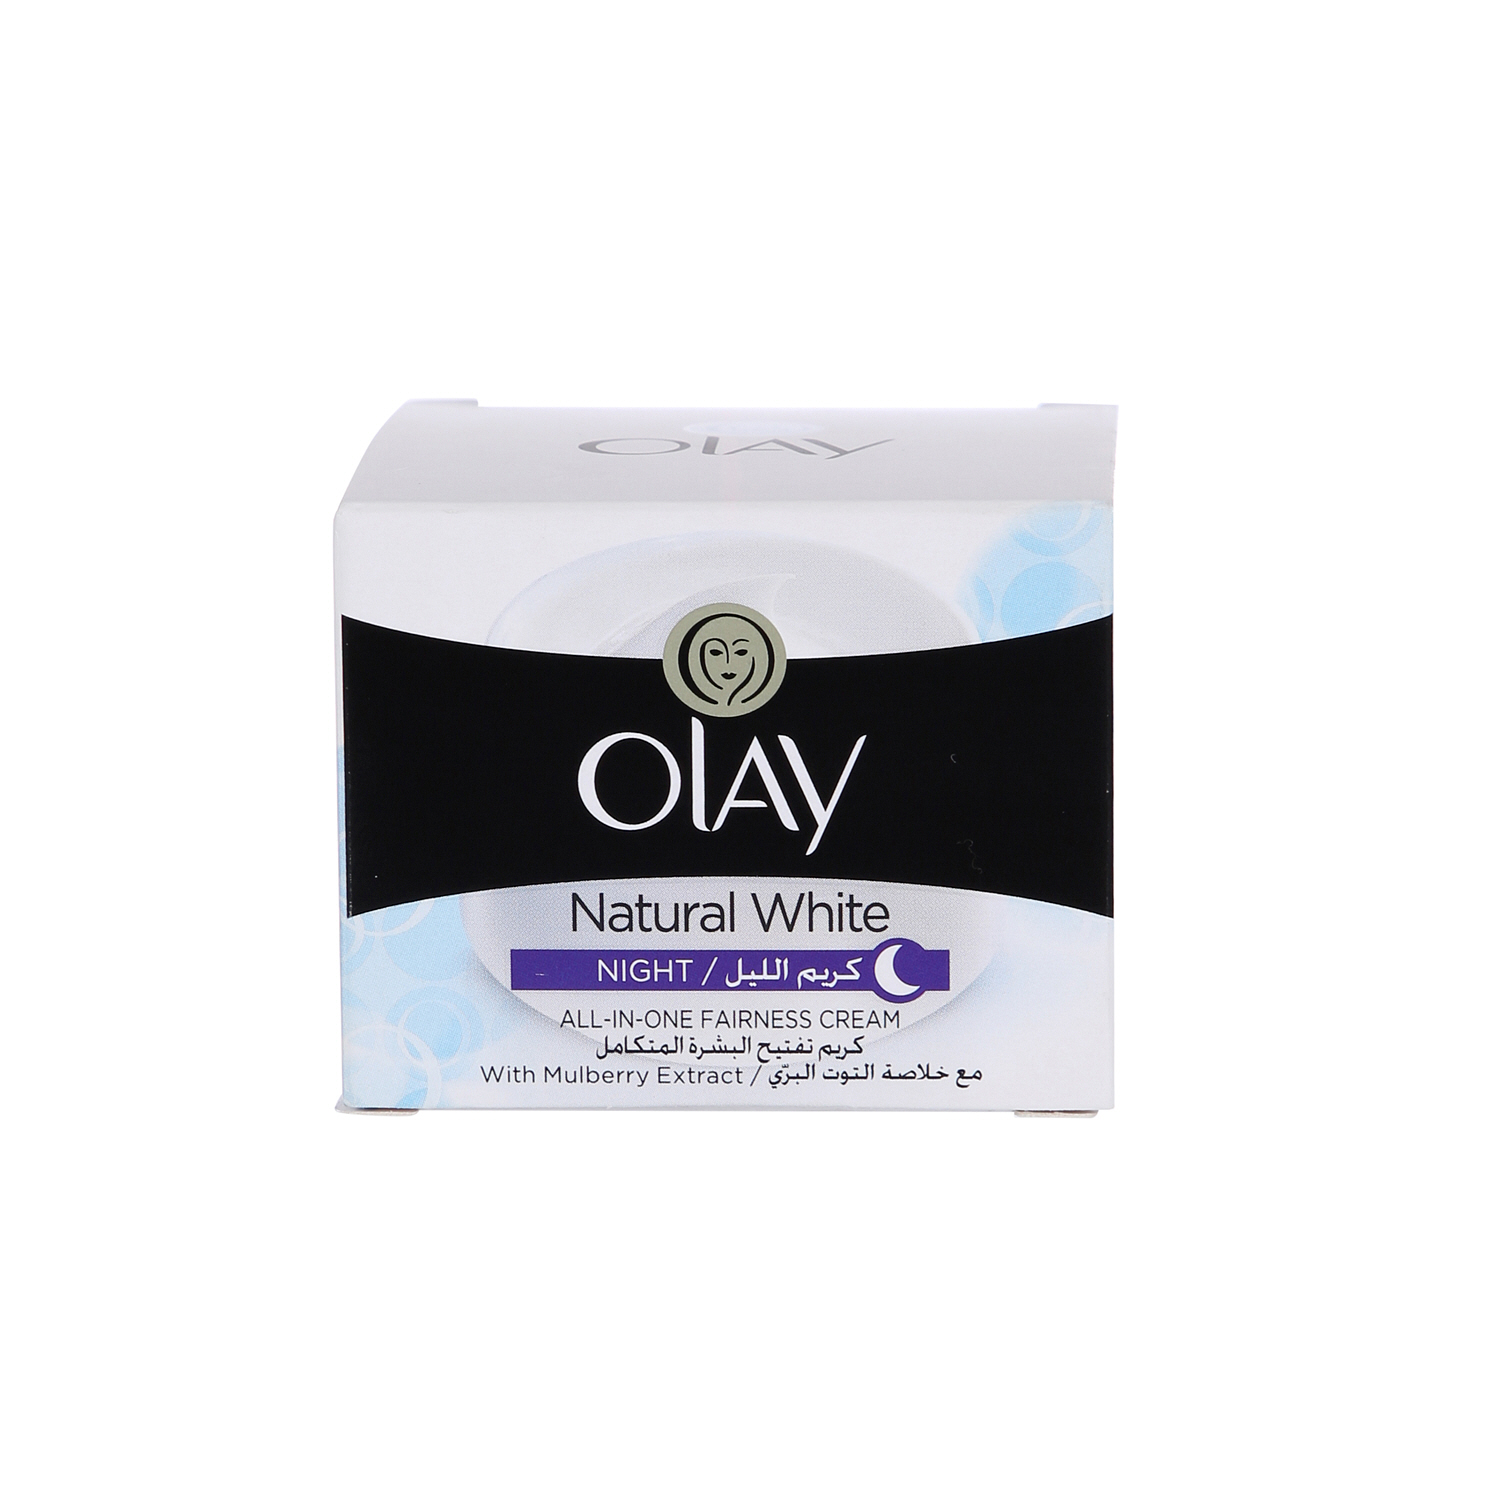 Olay Natural White Night Face Cream Apple 50gm